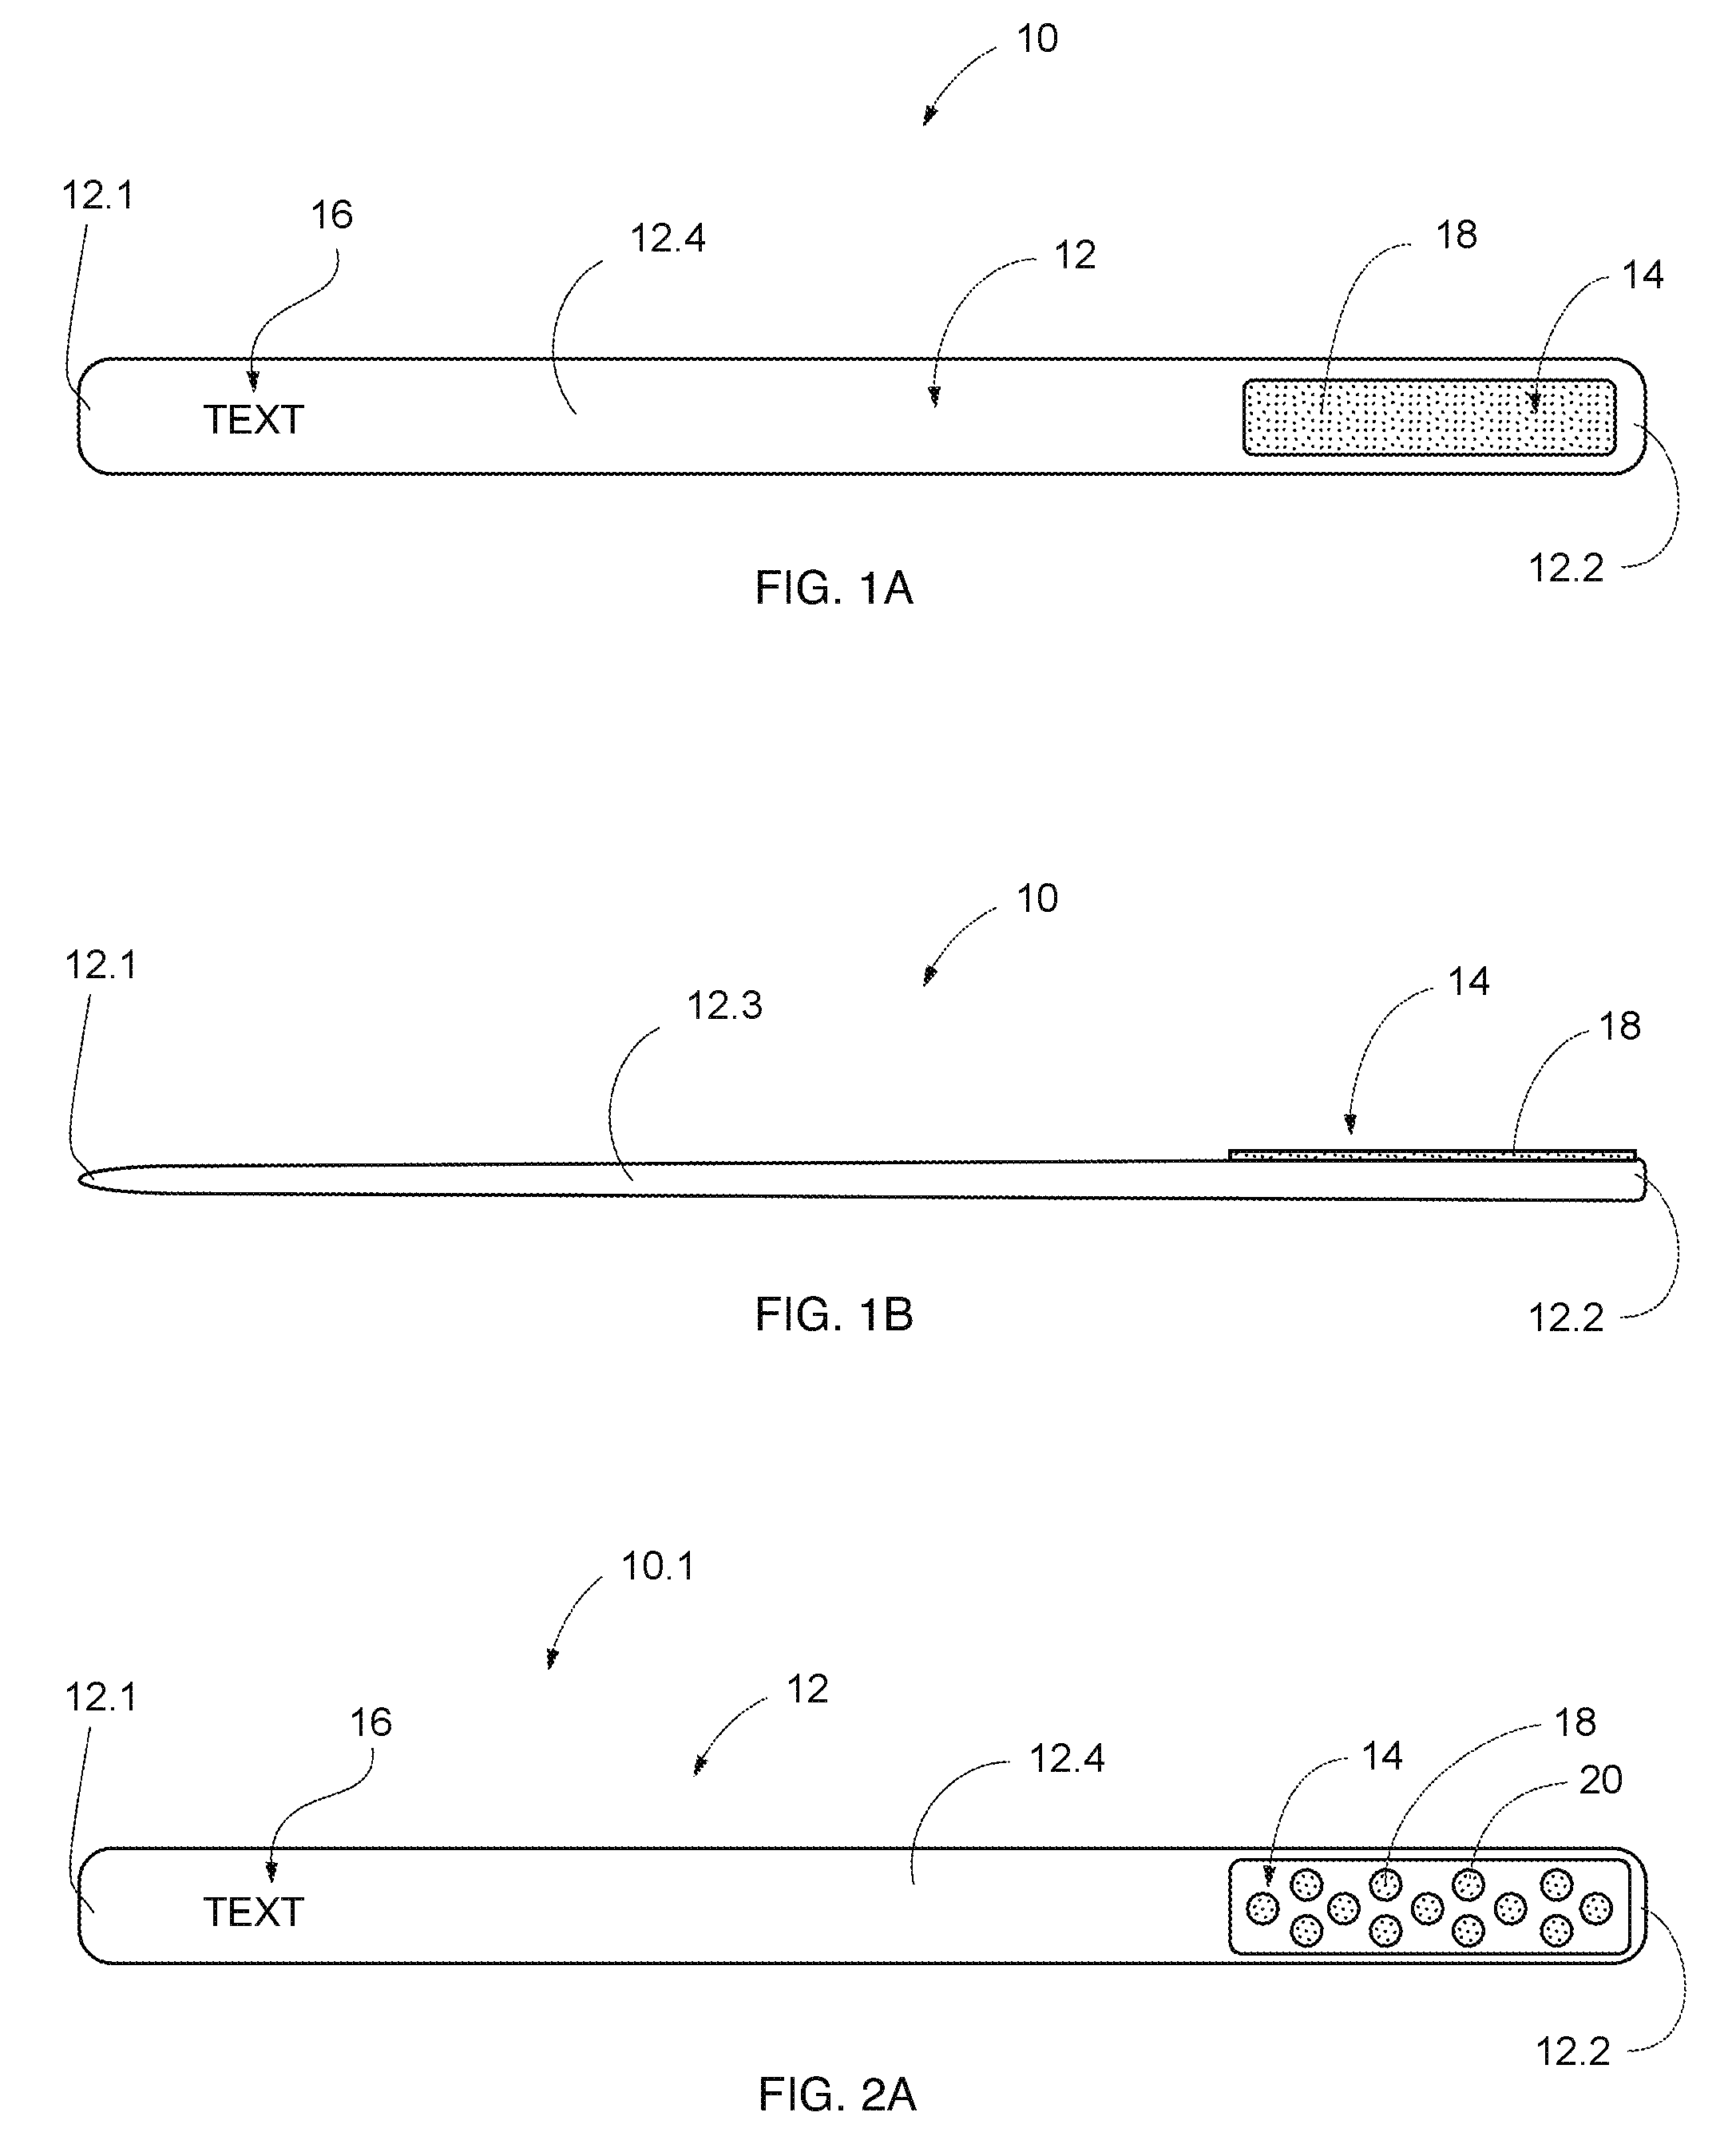 Drink sample apparatus and method of use